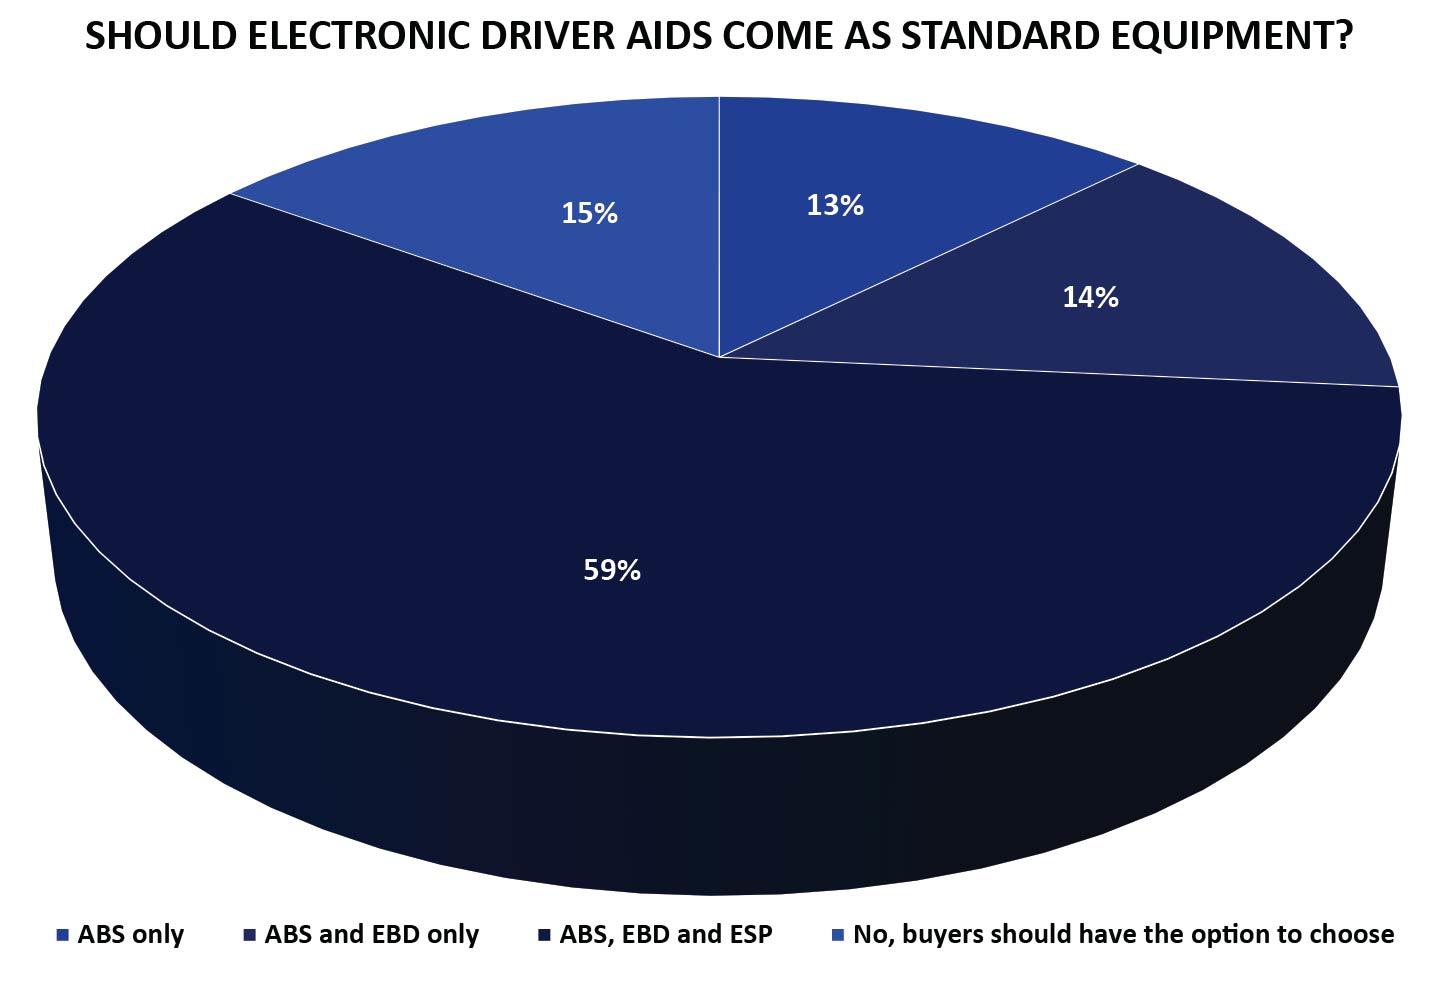 Brazil Electronic Driver AIDS Comes as Standard Equipment